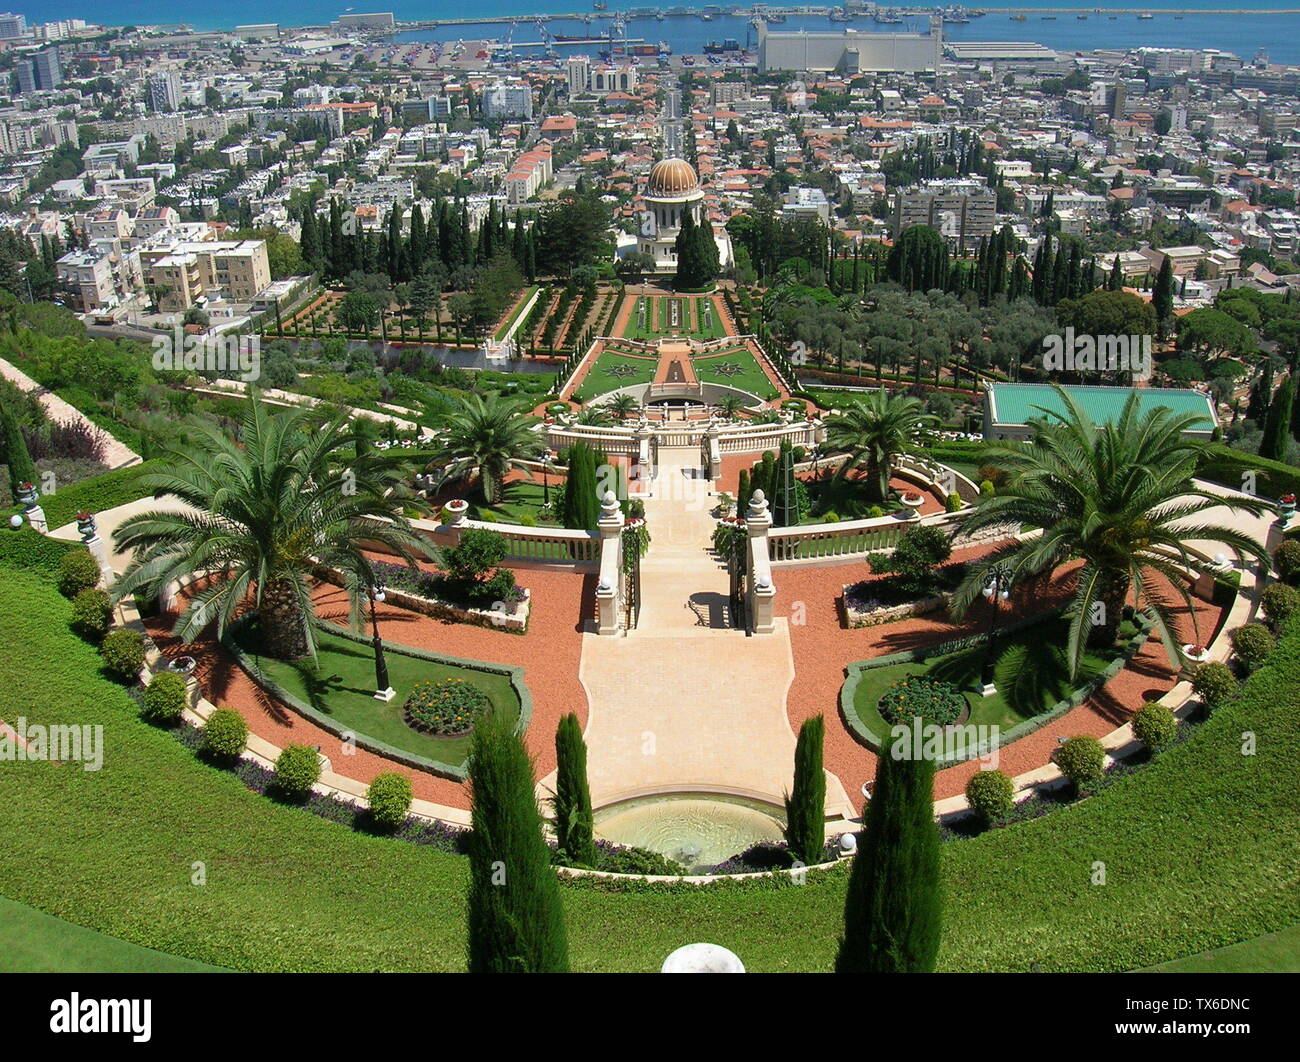 Israel - Haifa - Bahai Gardens 004; august 2005 Ca 4600Â ;  19 August 2005Â (according to Exif data); Own work; Piture taken by User:EdoM during august 2005 by a Nikon Ca 4600; Stock Photo